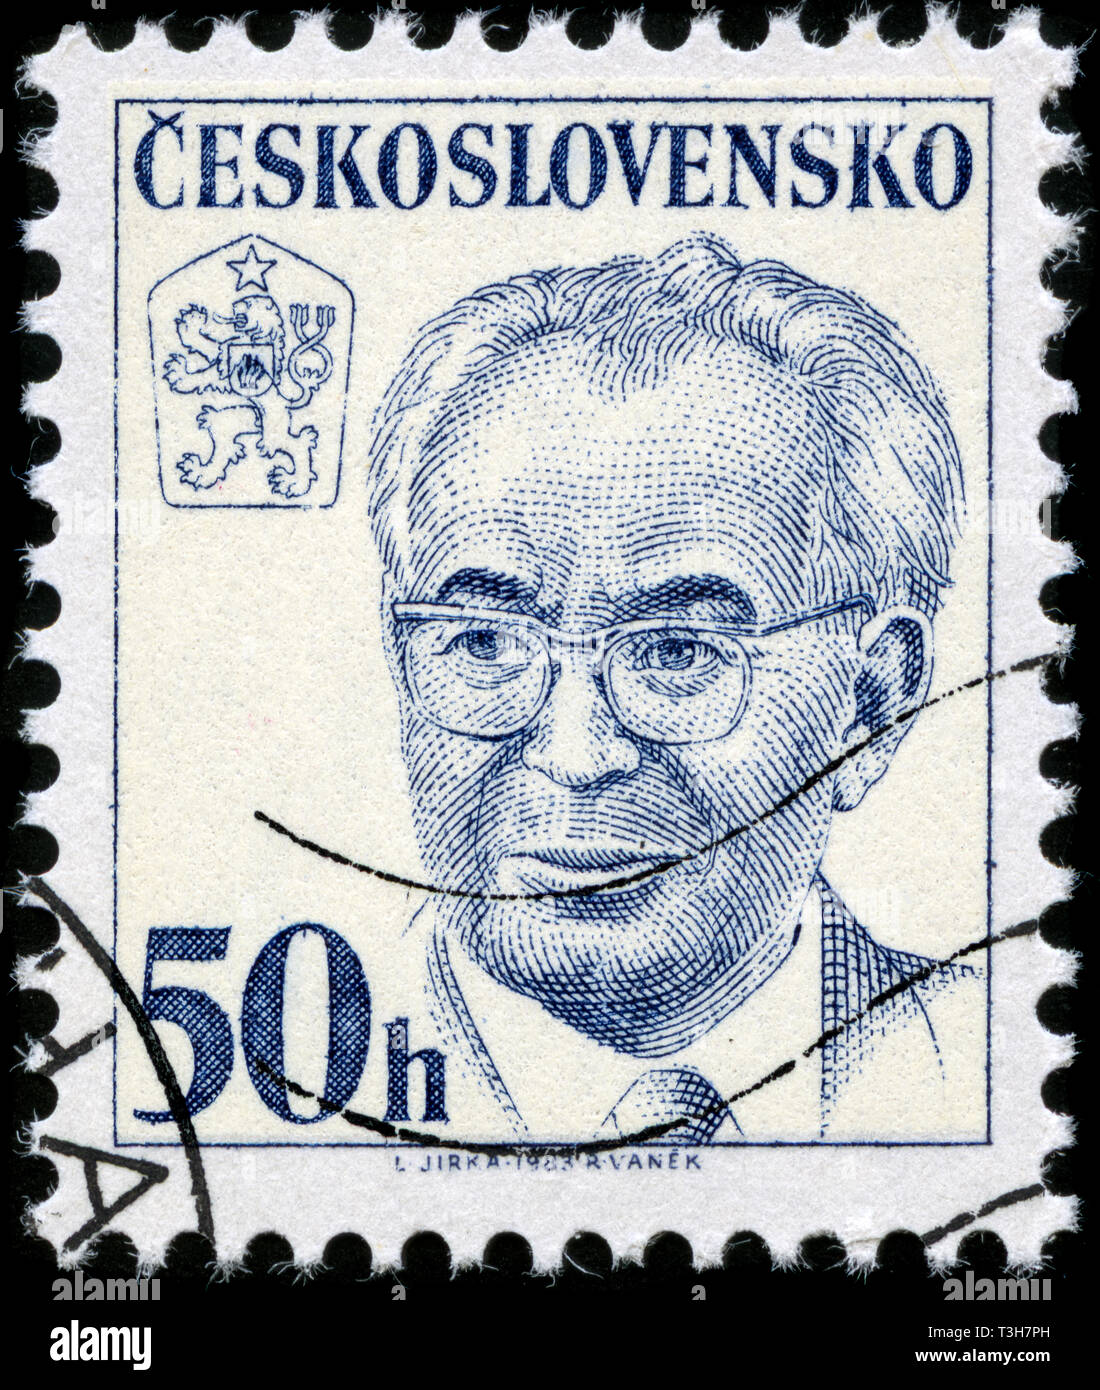 Postage stamp from the former state Czechoslovakia in the President Gustav Husák series issued in 1983 Stock Photo